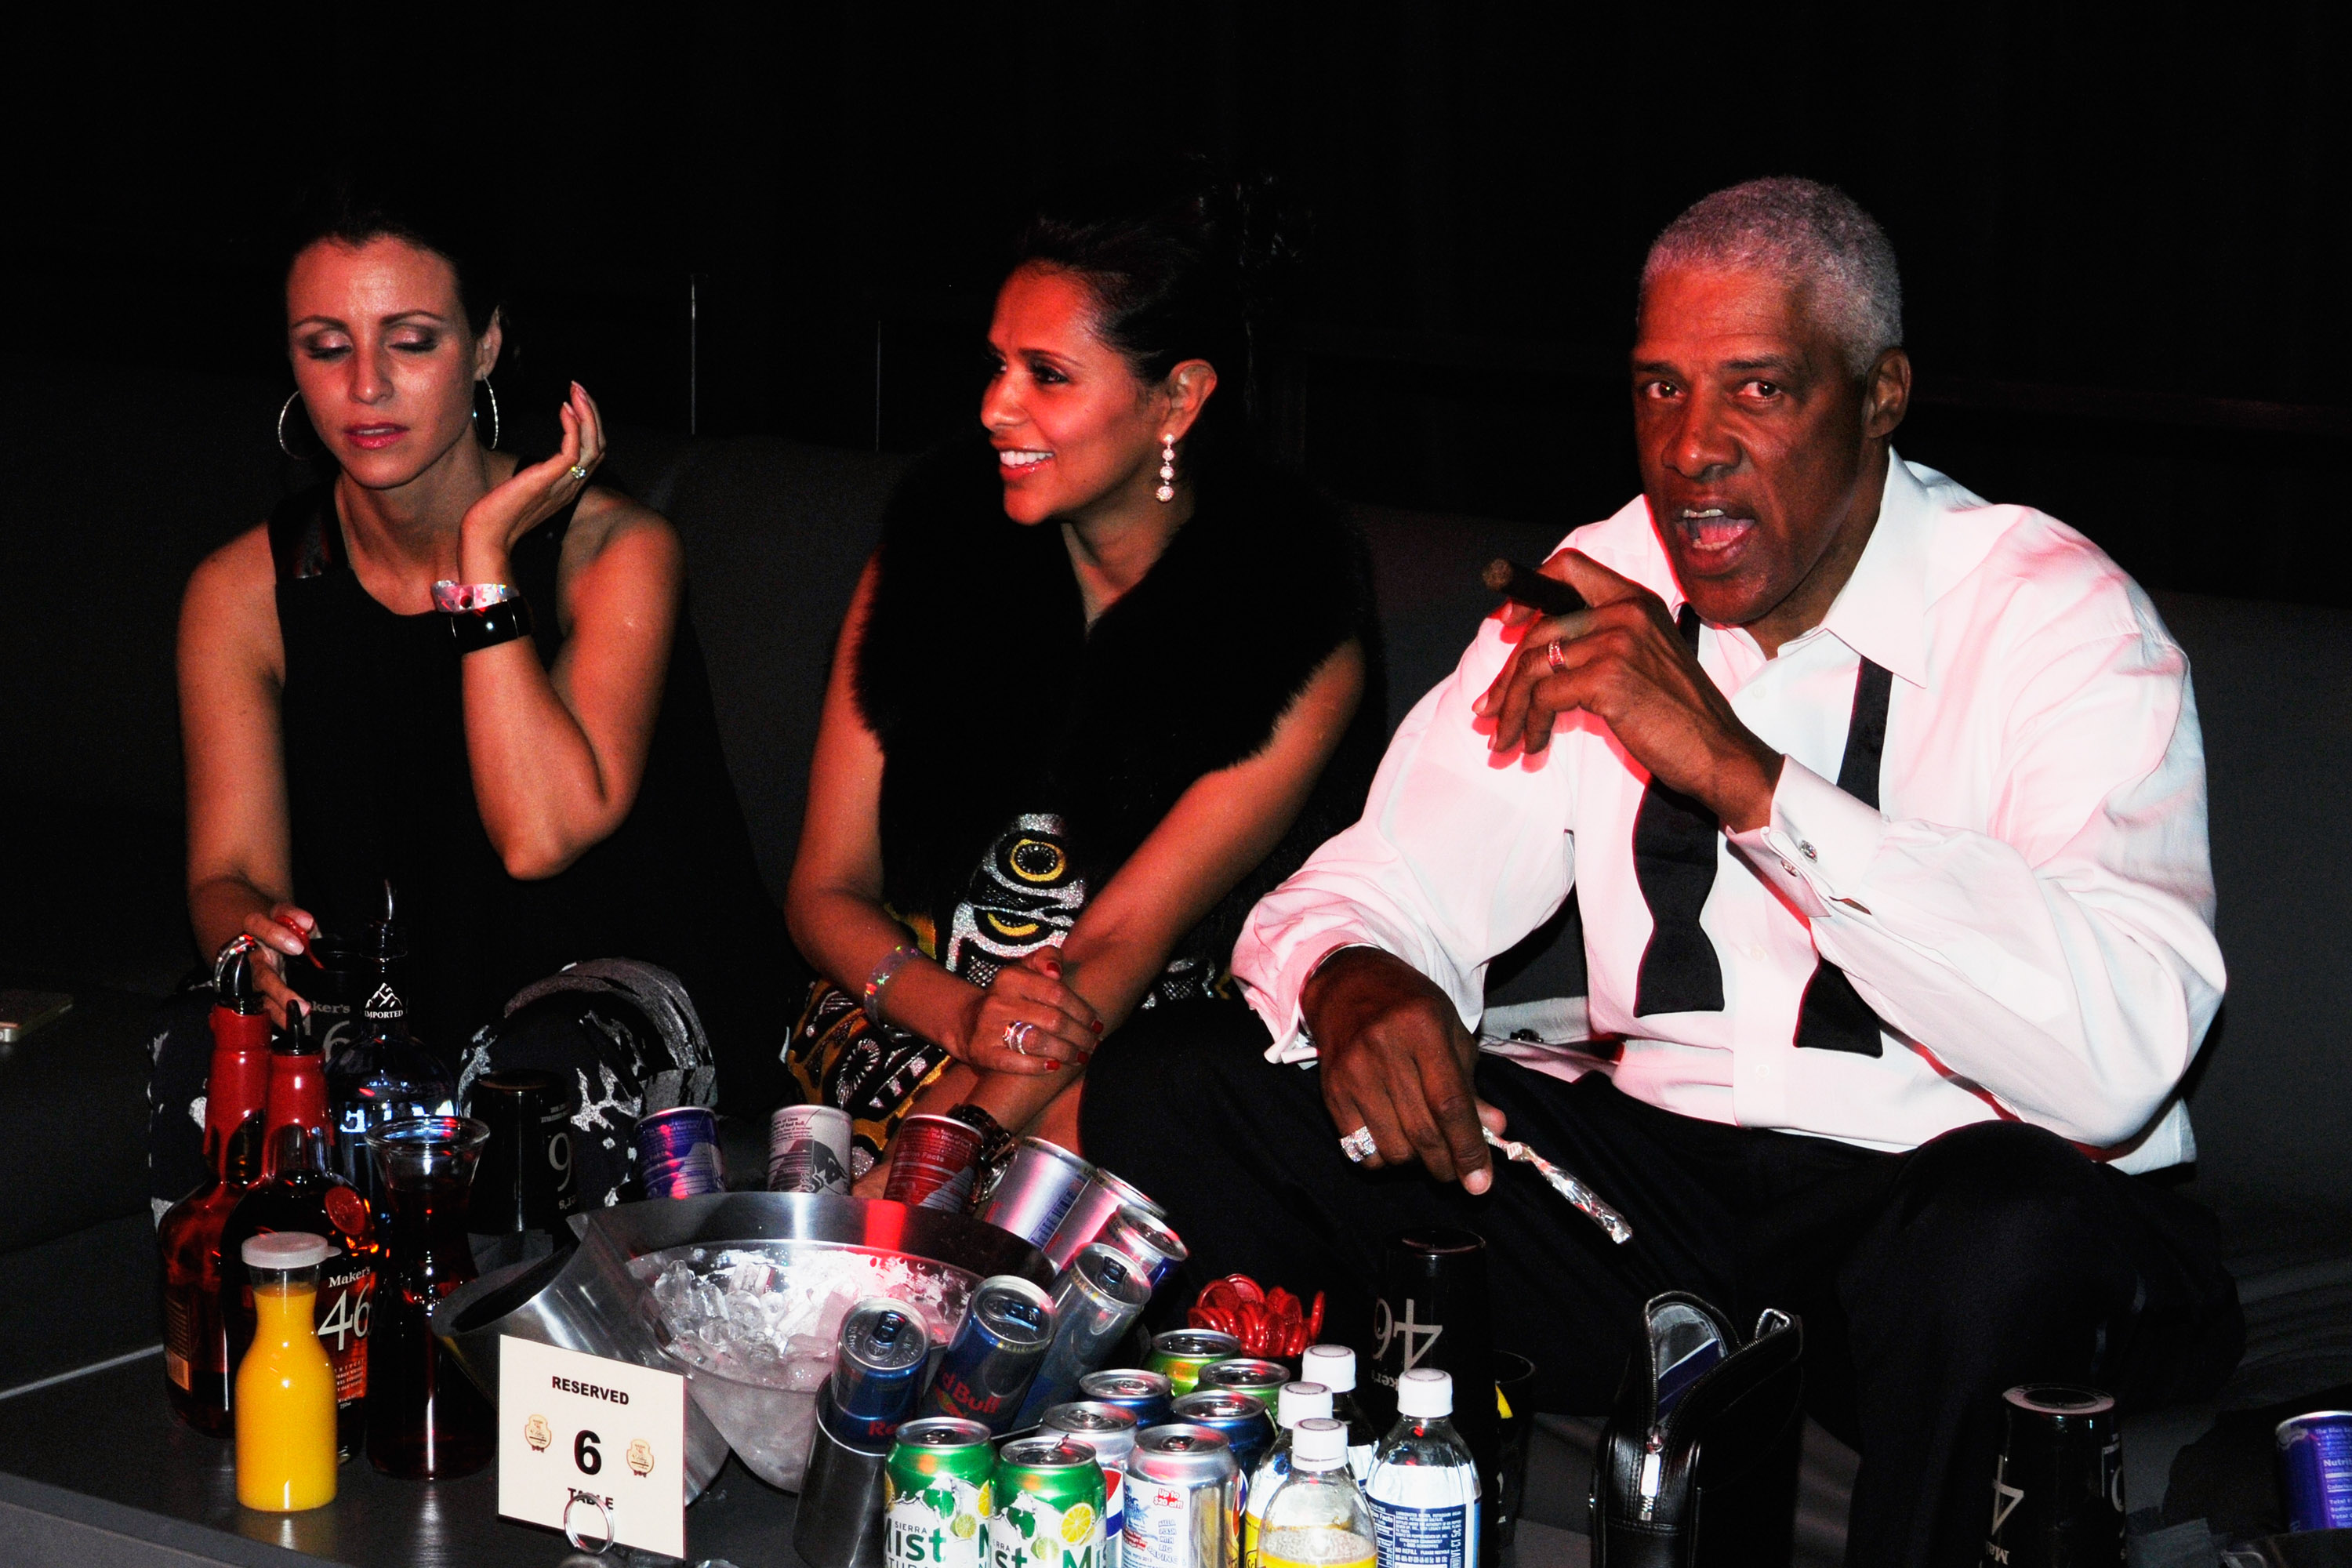 LOUISVILLE, KY - MAY 03:  Julius Erving attends the Maxim And Maker's 46 Fillies & Stallions Hosted By Blackrock at Mellwood Arts & Entertainment Center on May 3, 2013 in Louisville, Kentucky.  (Photo by Stephen Cohen/Getty Images for Maxim)